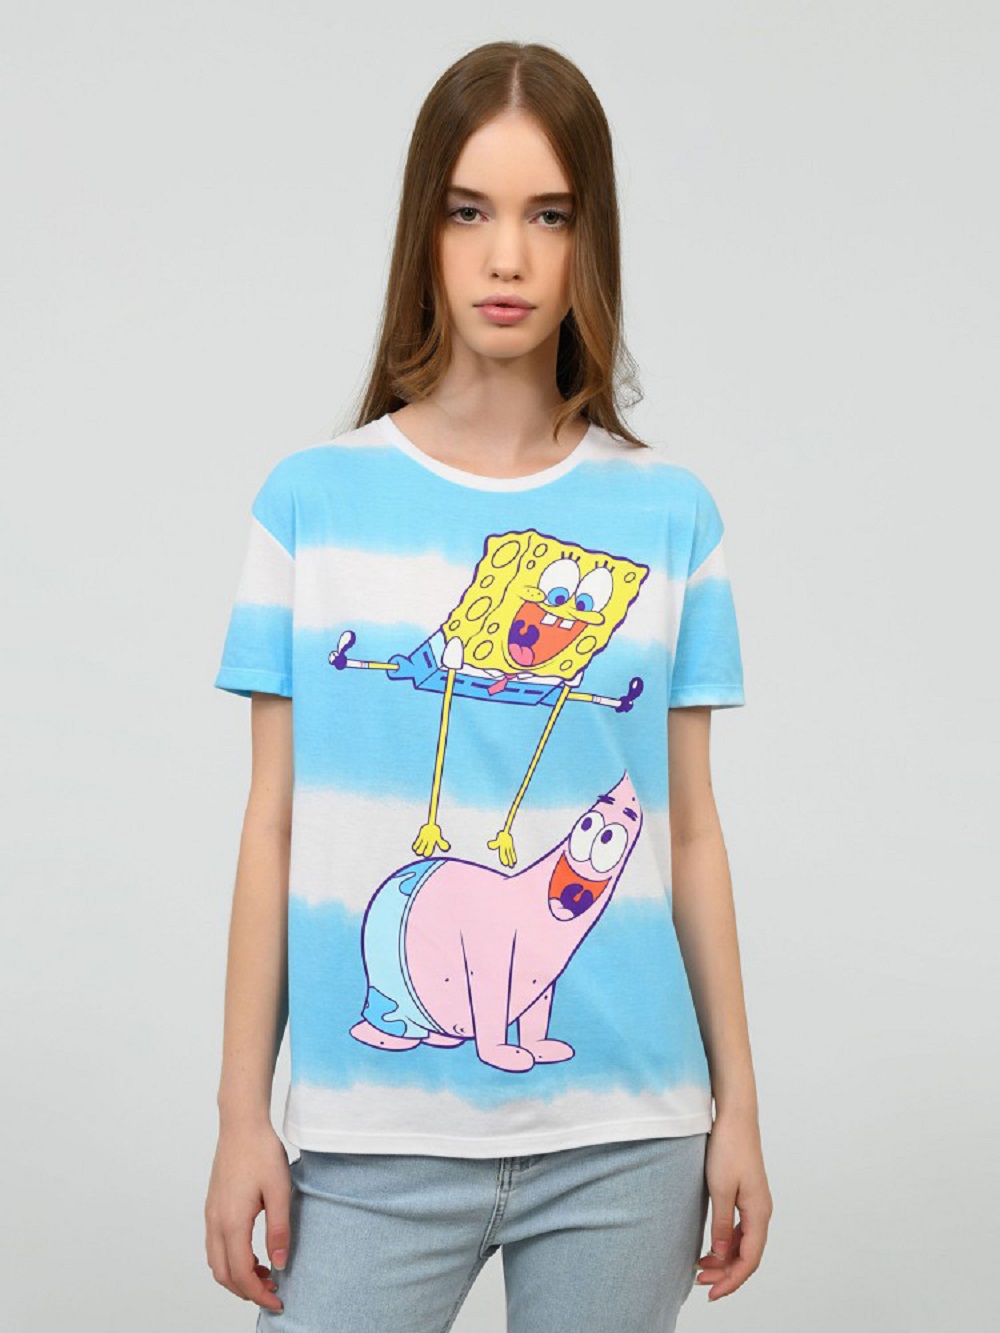 Gangster Spongebob Have Fun With Friends Plus Size Up To 5xl